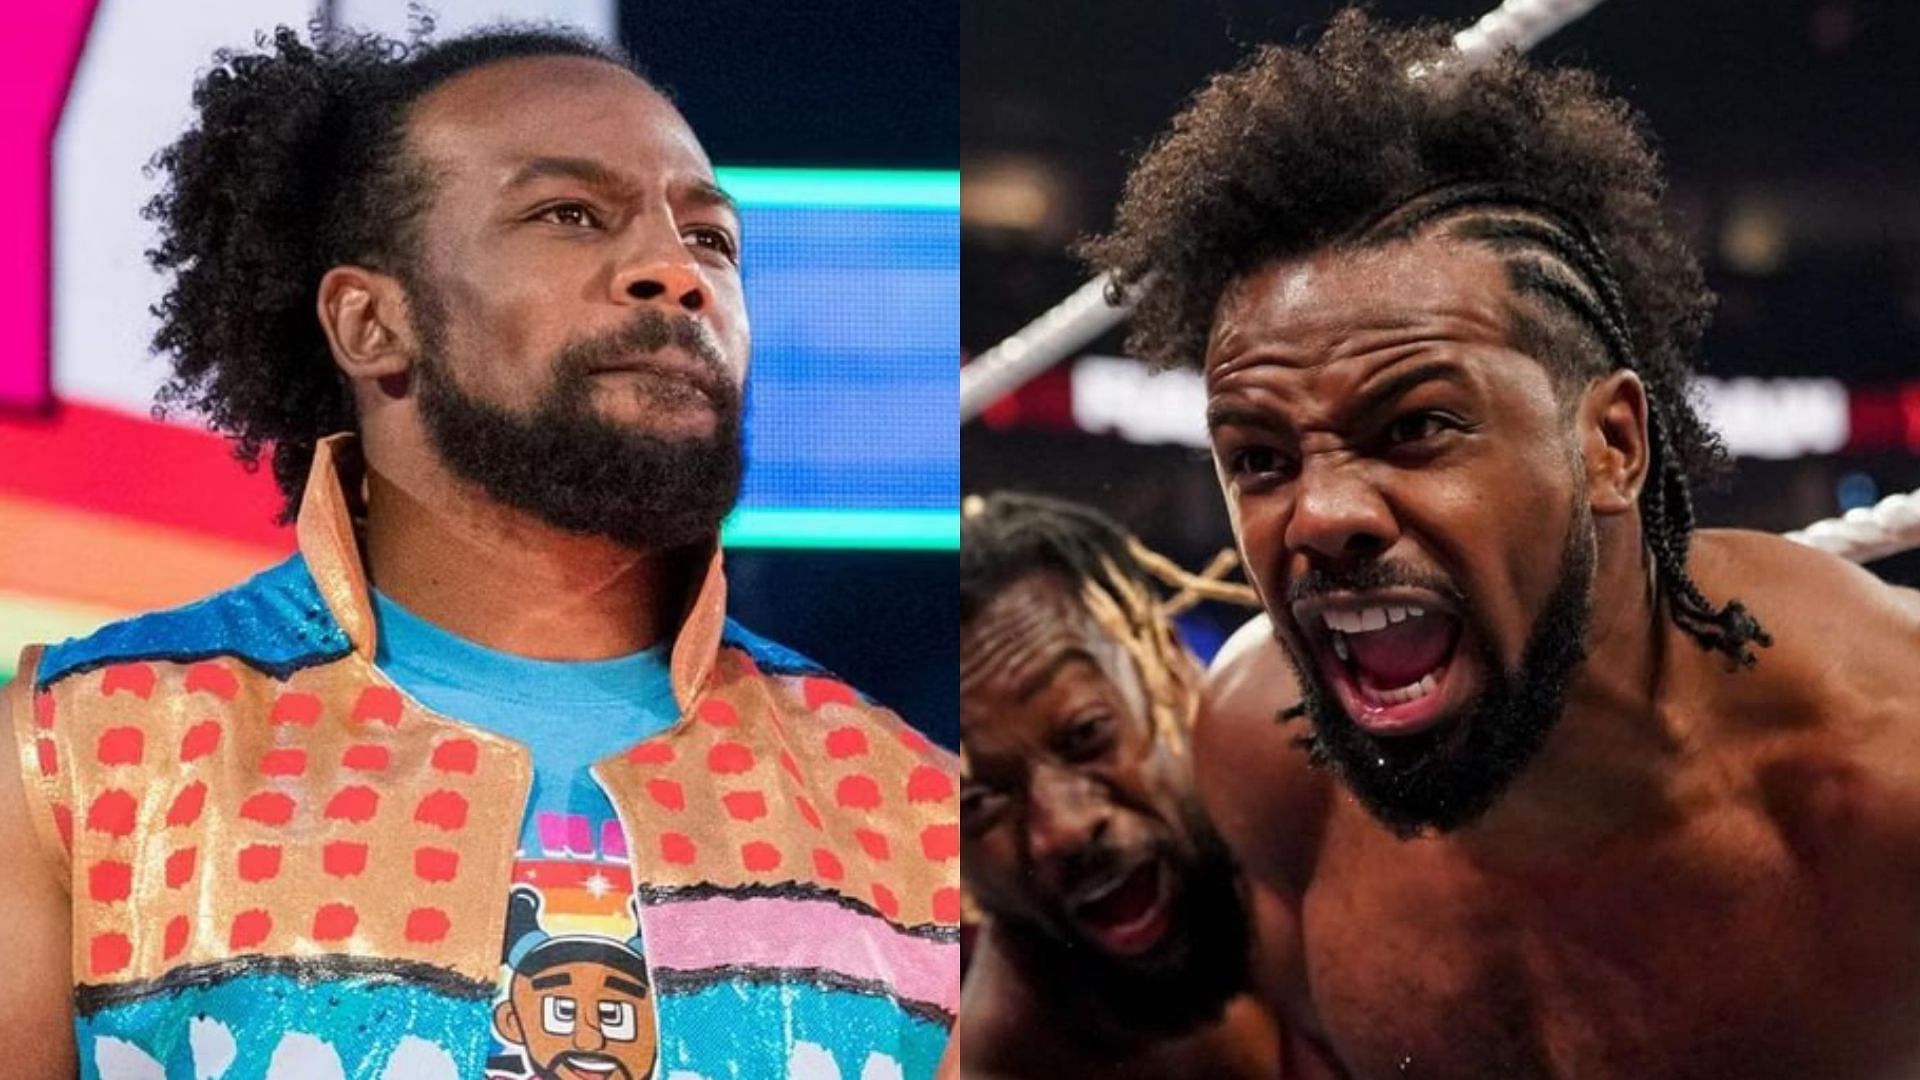 Xavier Woods is a part of The New Day faction on RAW.